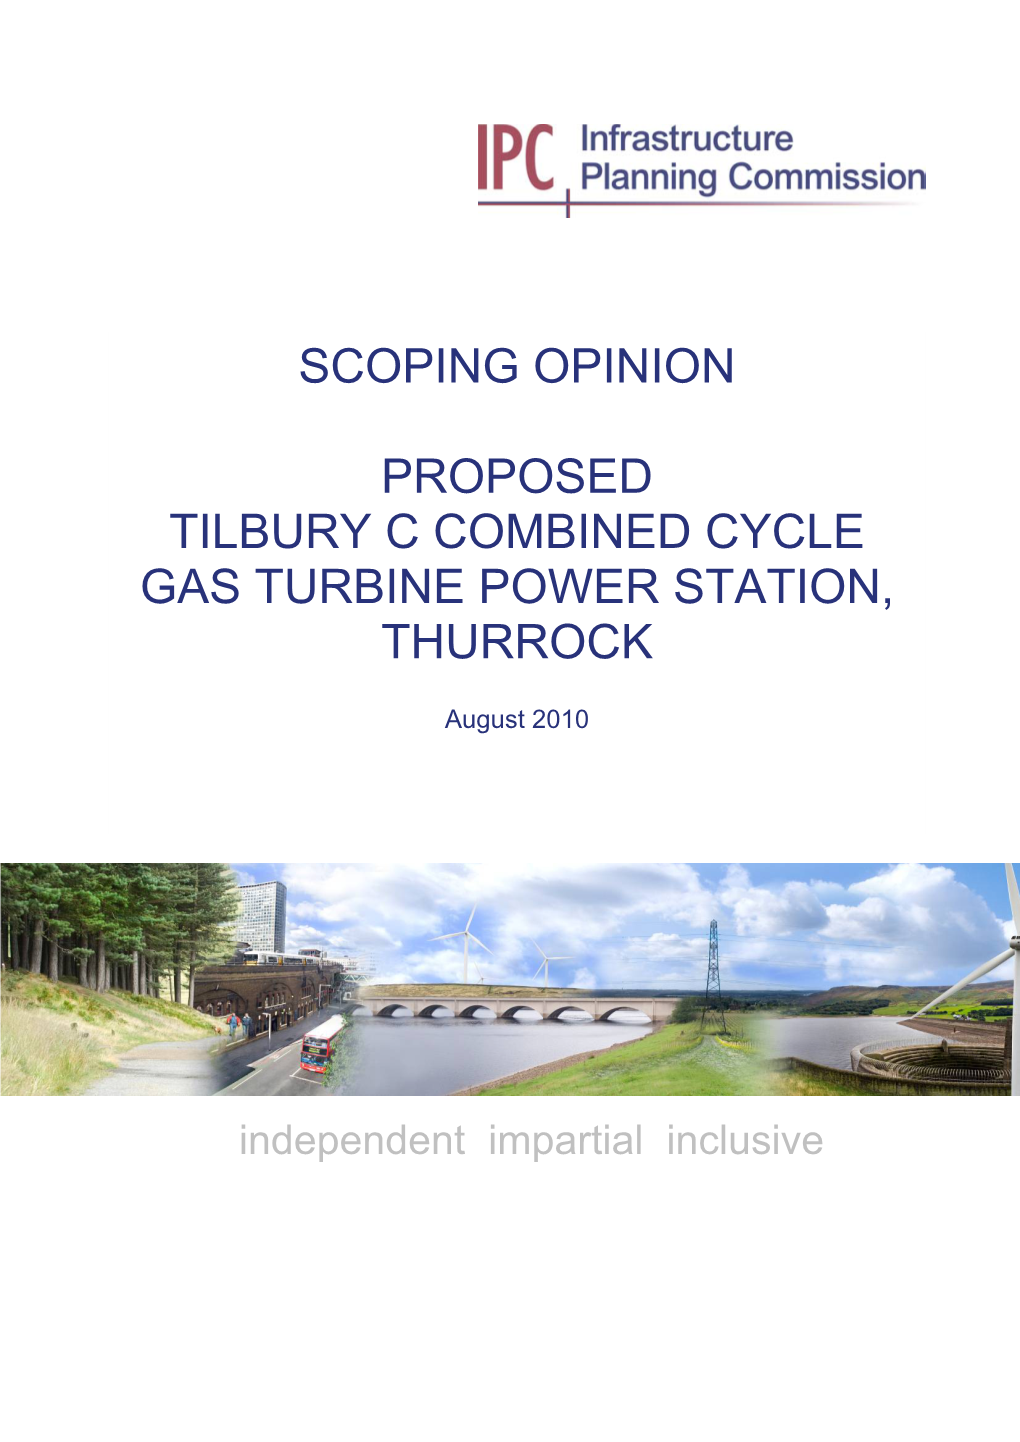 Scoping Opinion Proposed Tilbury C Combined Cycle